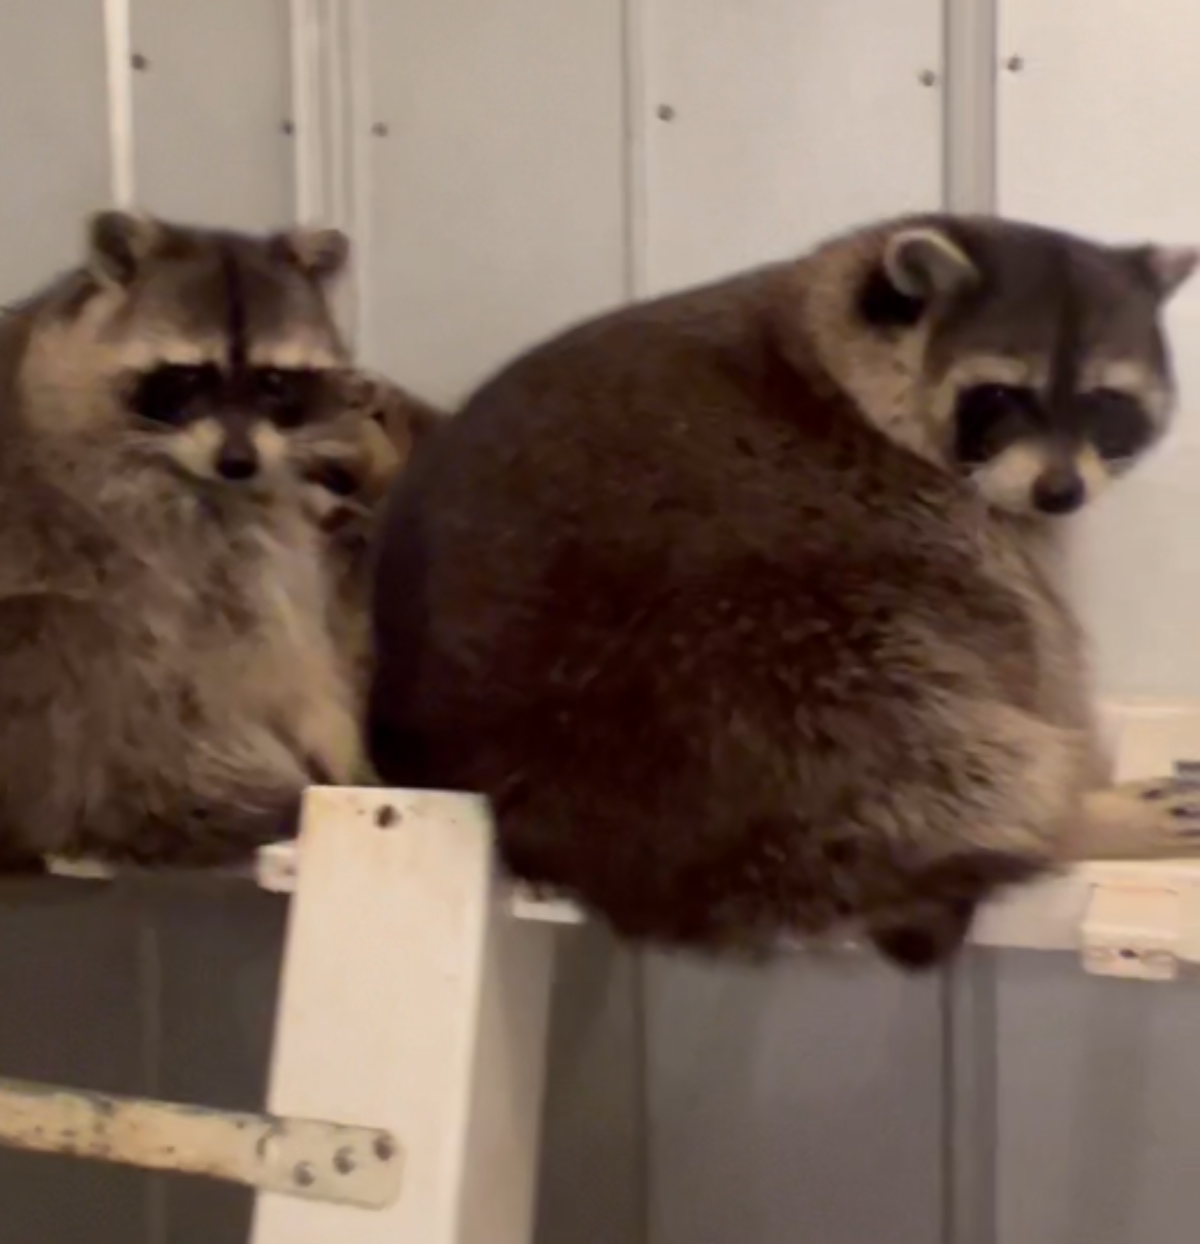 A photo of two incredibly fat pet raccoons sitting on a ledge